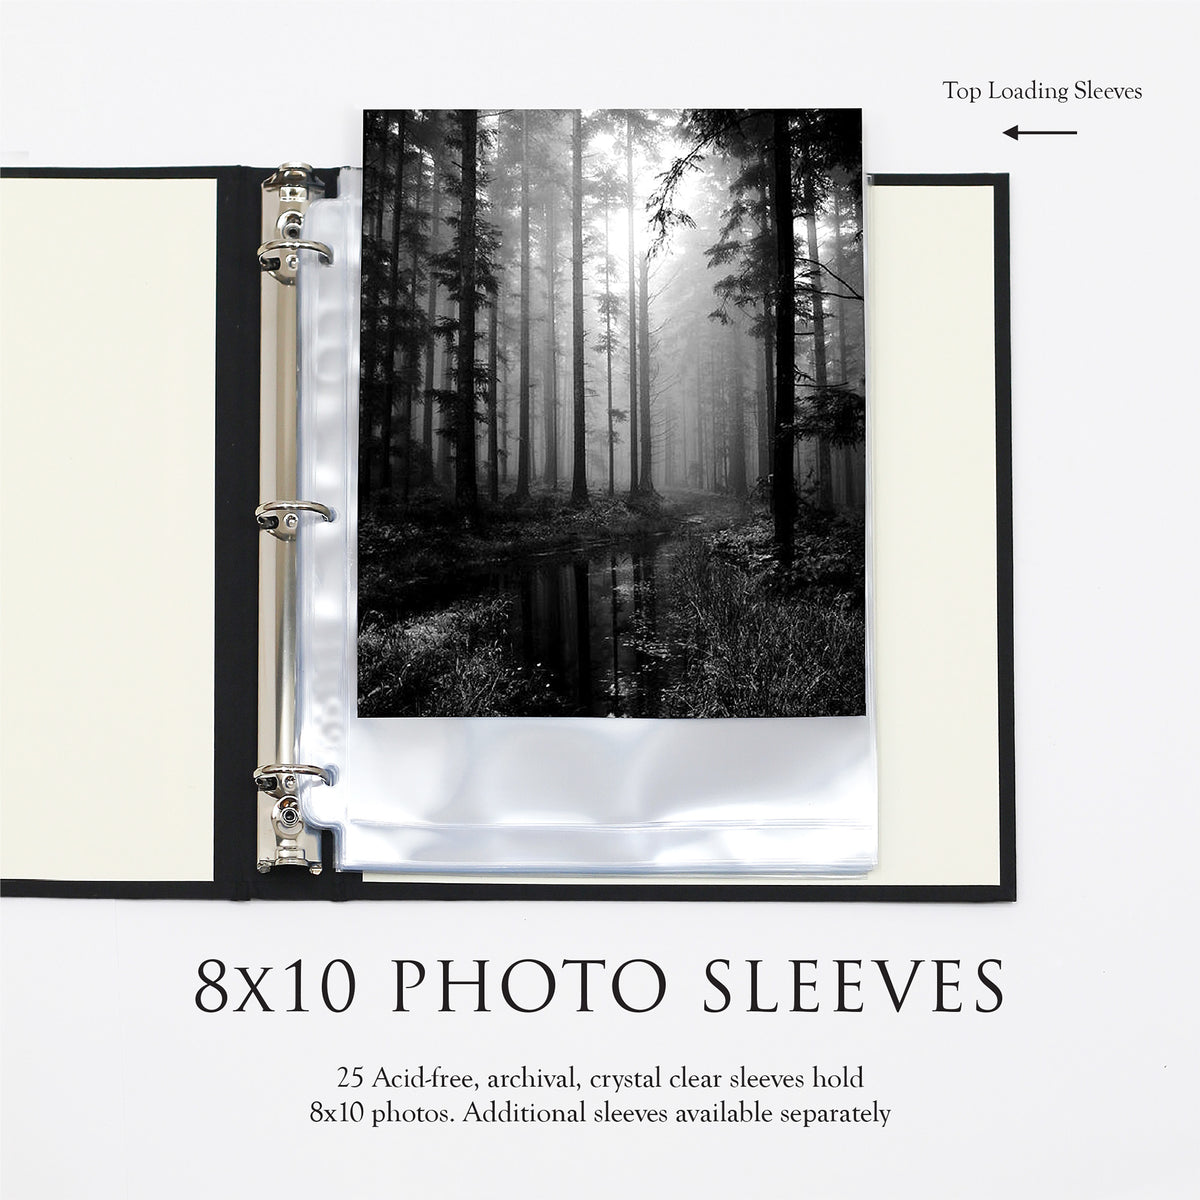 Large Photo Binder For 8x10 Photos | Cover: Terra Cotta Vegan Leather | Available Personalized